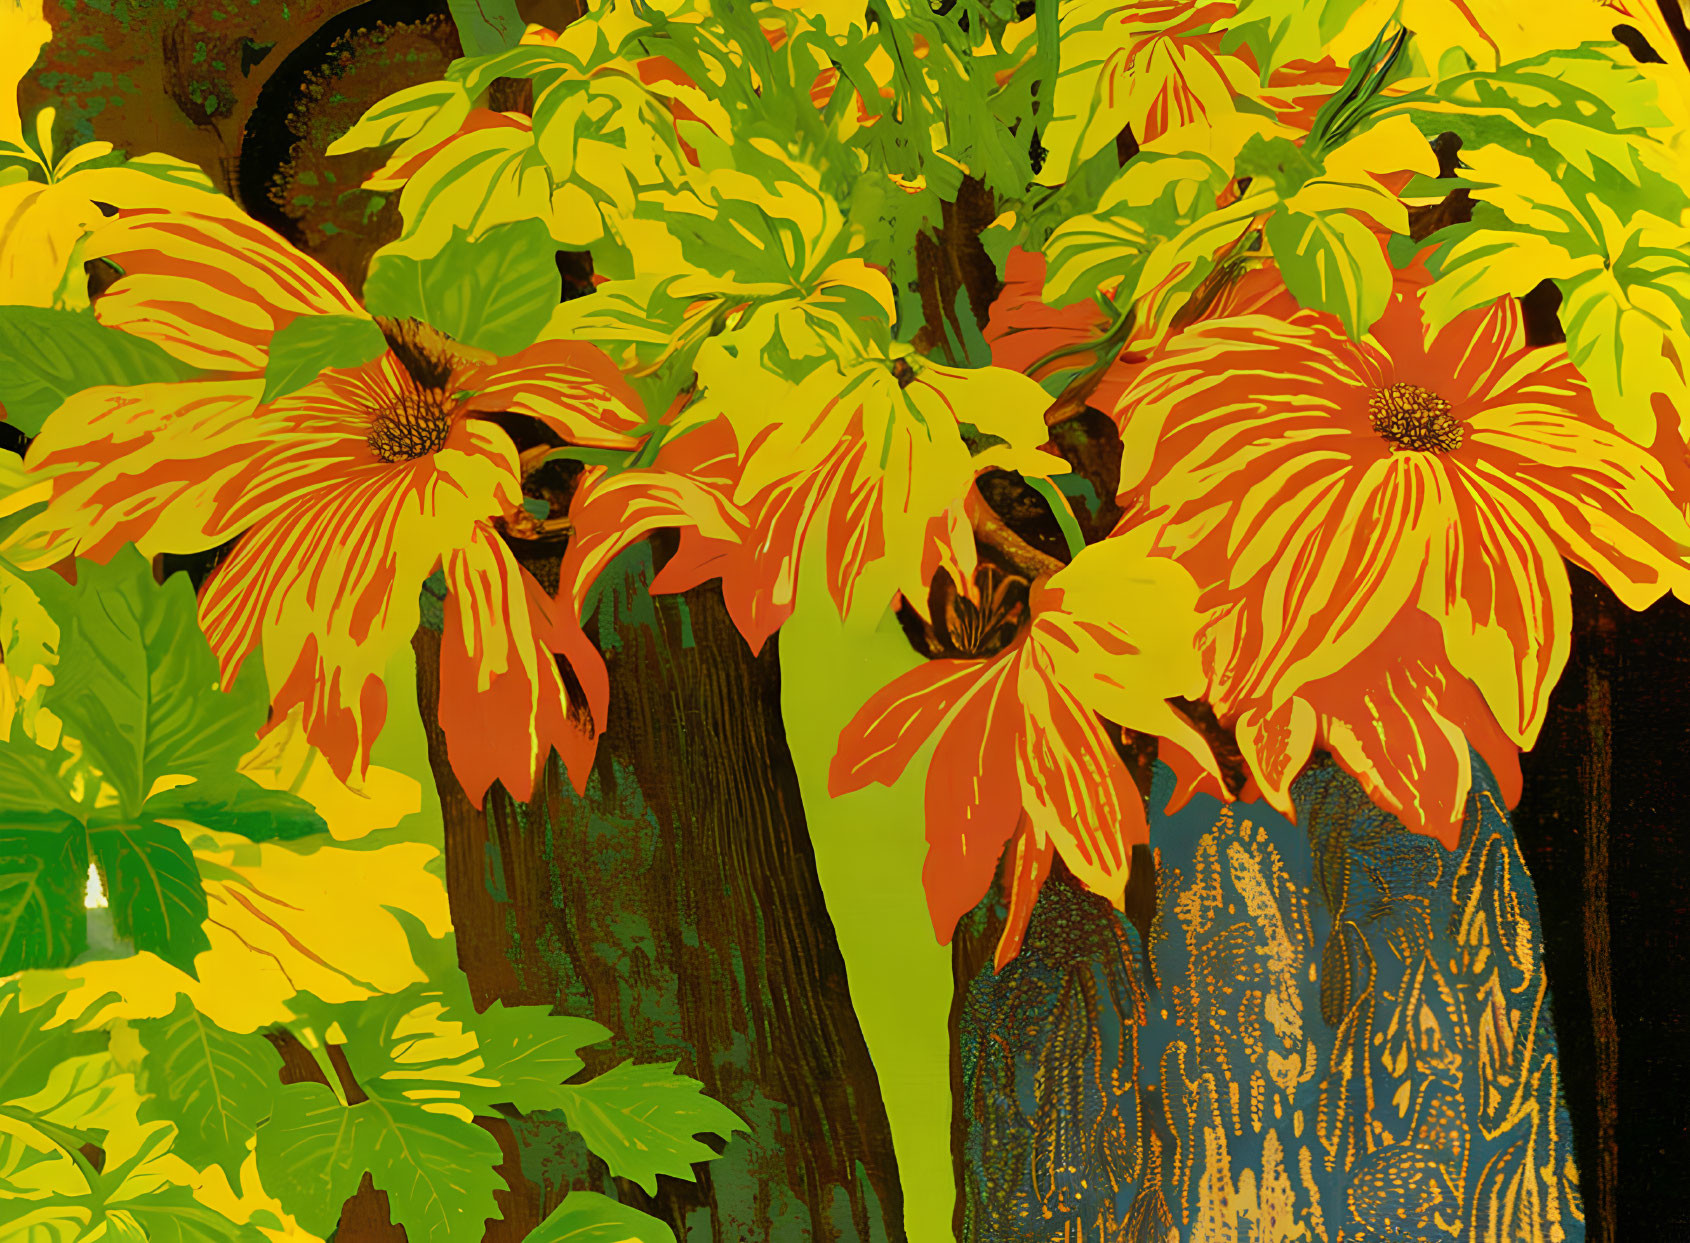 Colorful Digital Art: Yellow and Orange Flowers on Textured Background